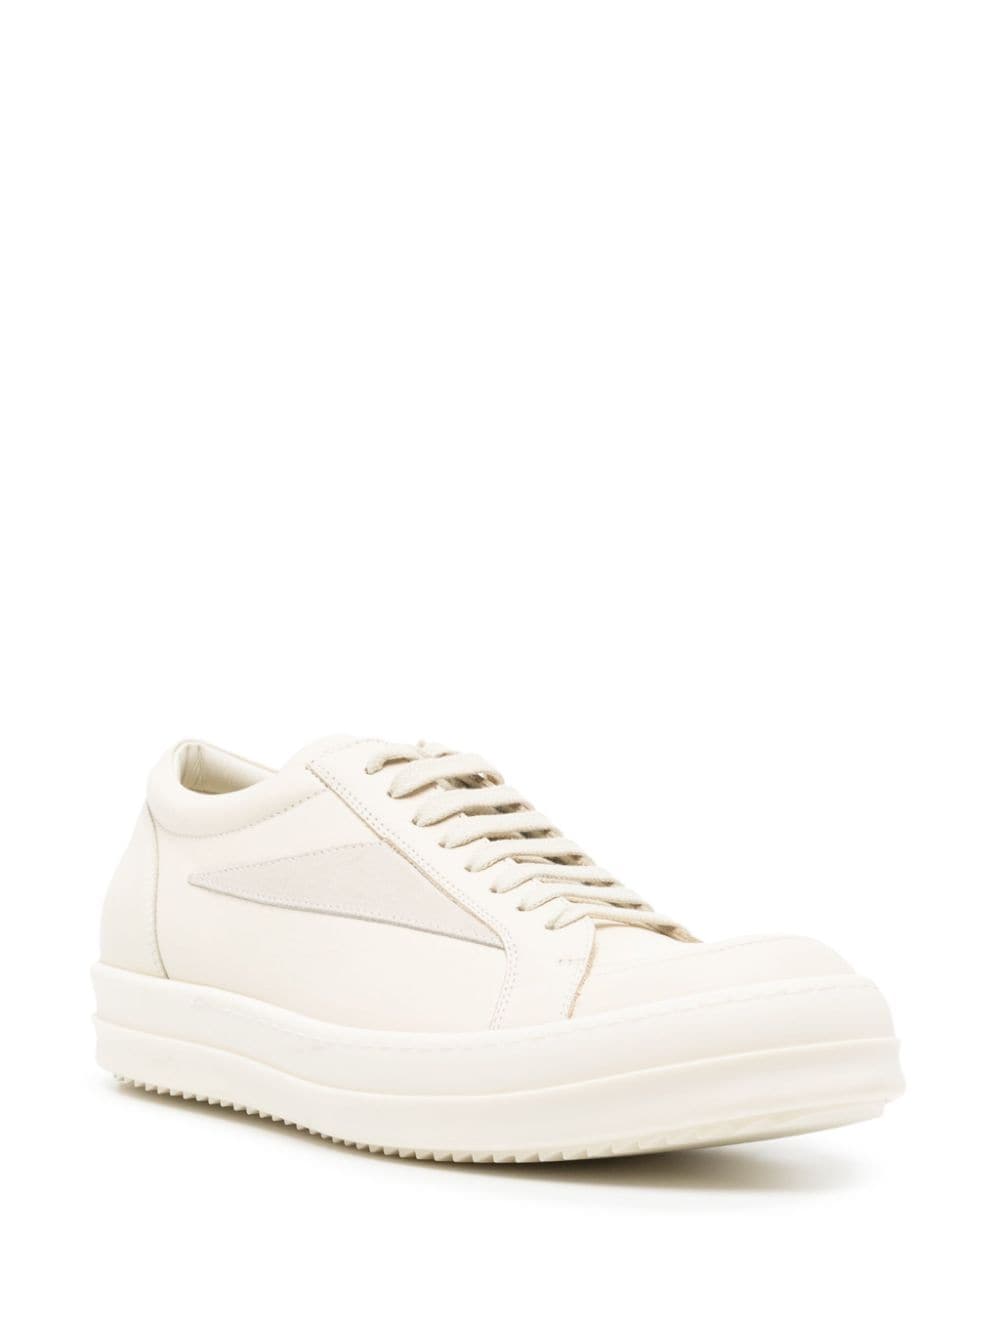 Image 2 of Rick Owens Lido Vintage leather sneakers